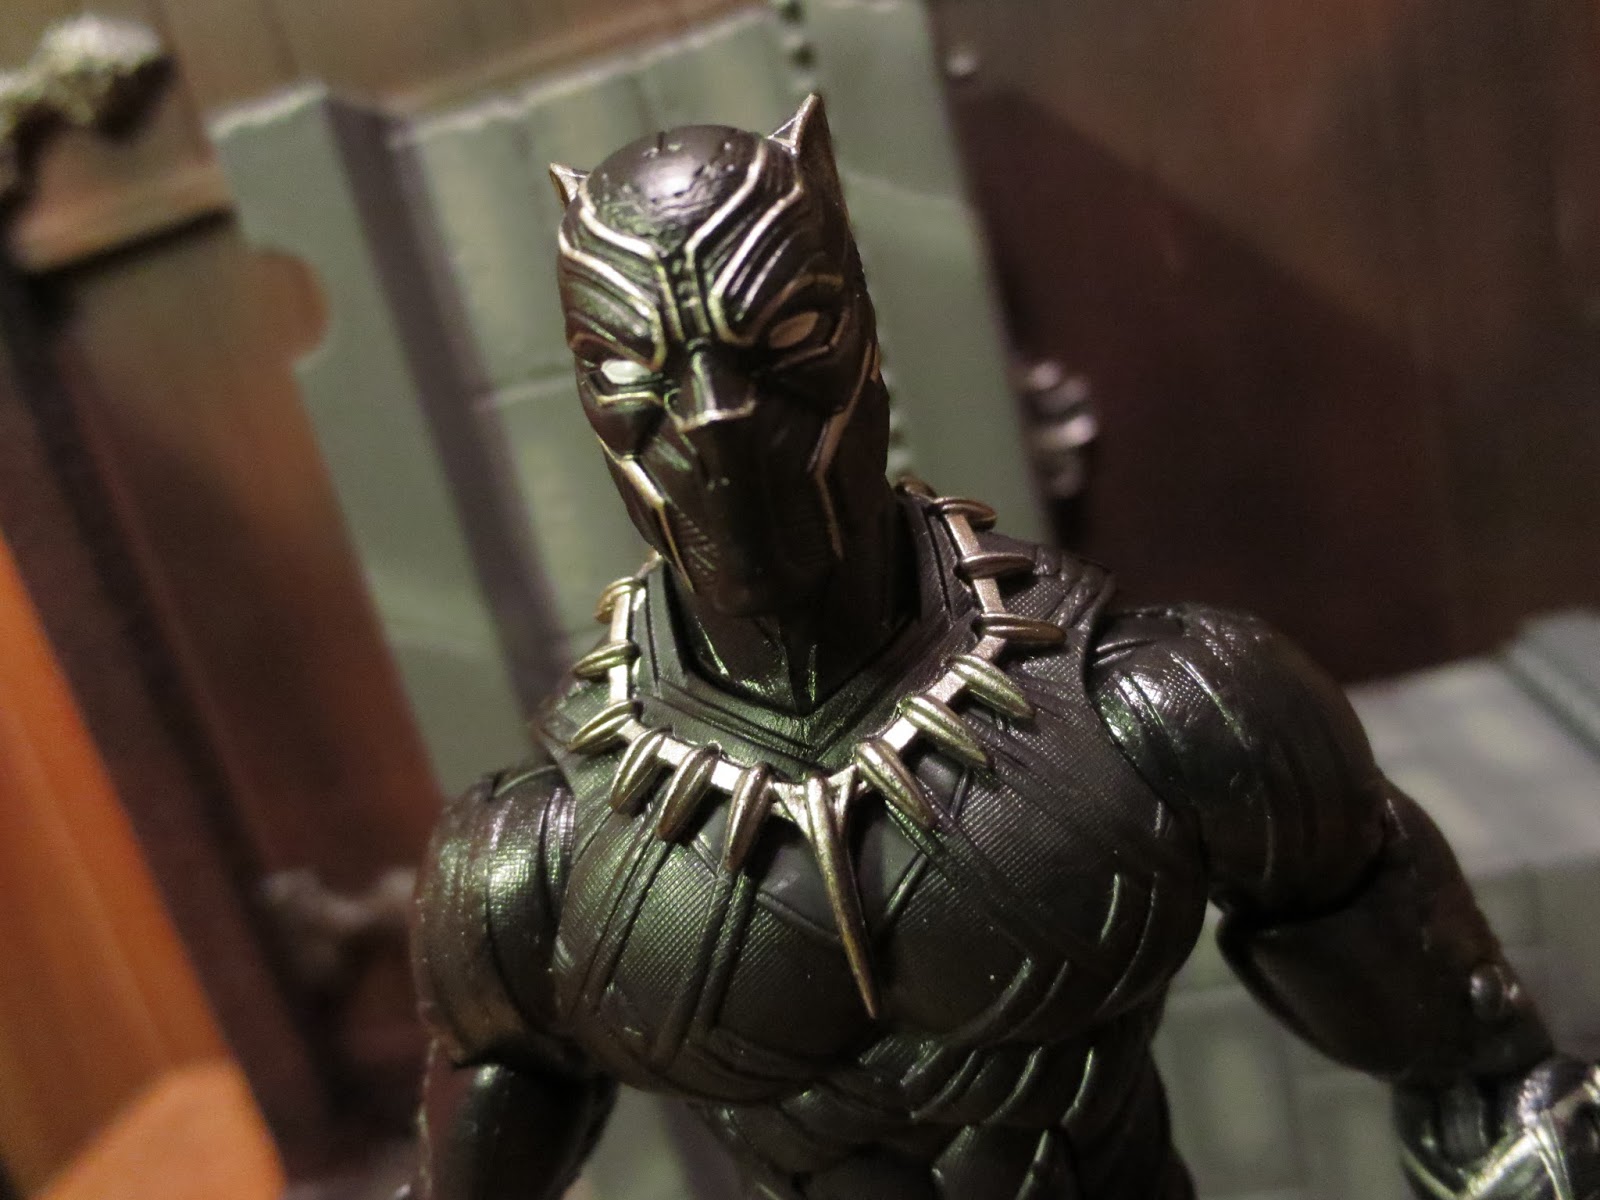 Action Figure Barbecue: Action Figure Review: Black Panther from Marvel  Legends: Captan America: Civil War by Hasbro